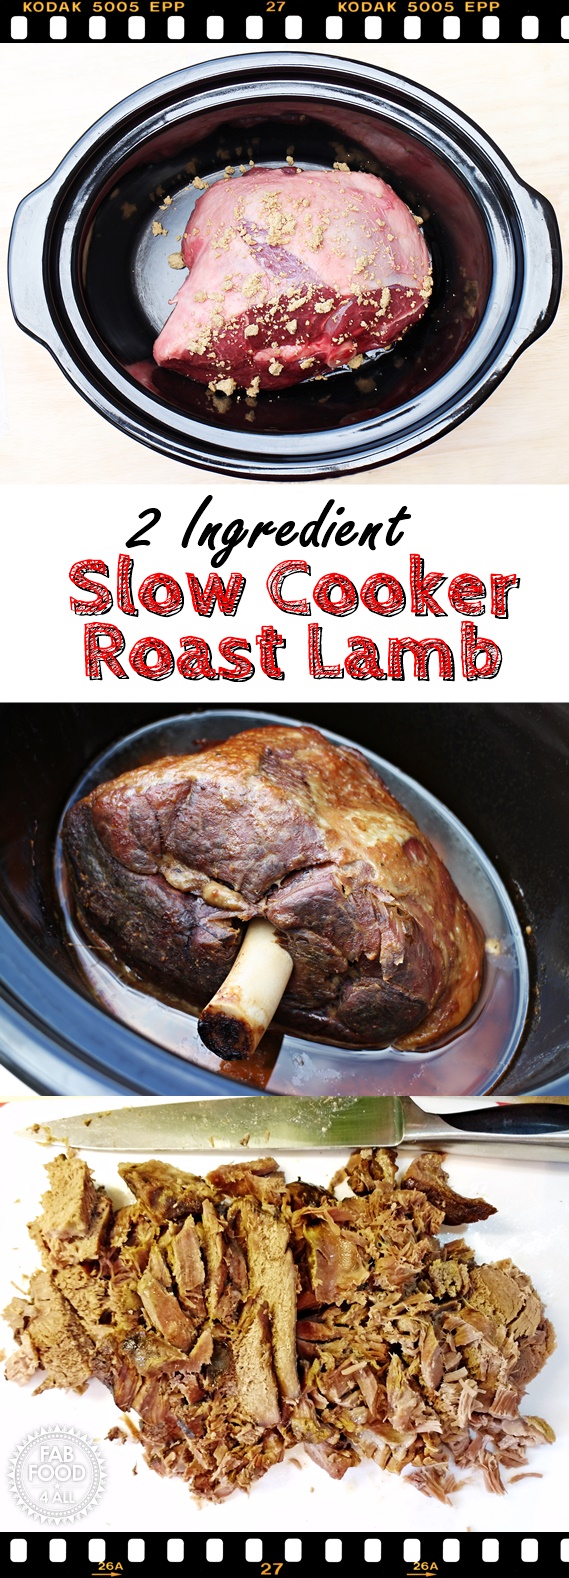 So easy, 2 Ingredient Slow Cooker Roast Lamb - super quick to prepare and super tasty & tender! @FabFood4All